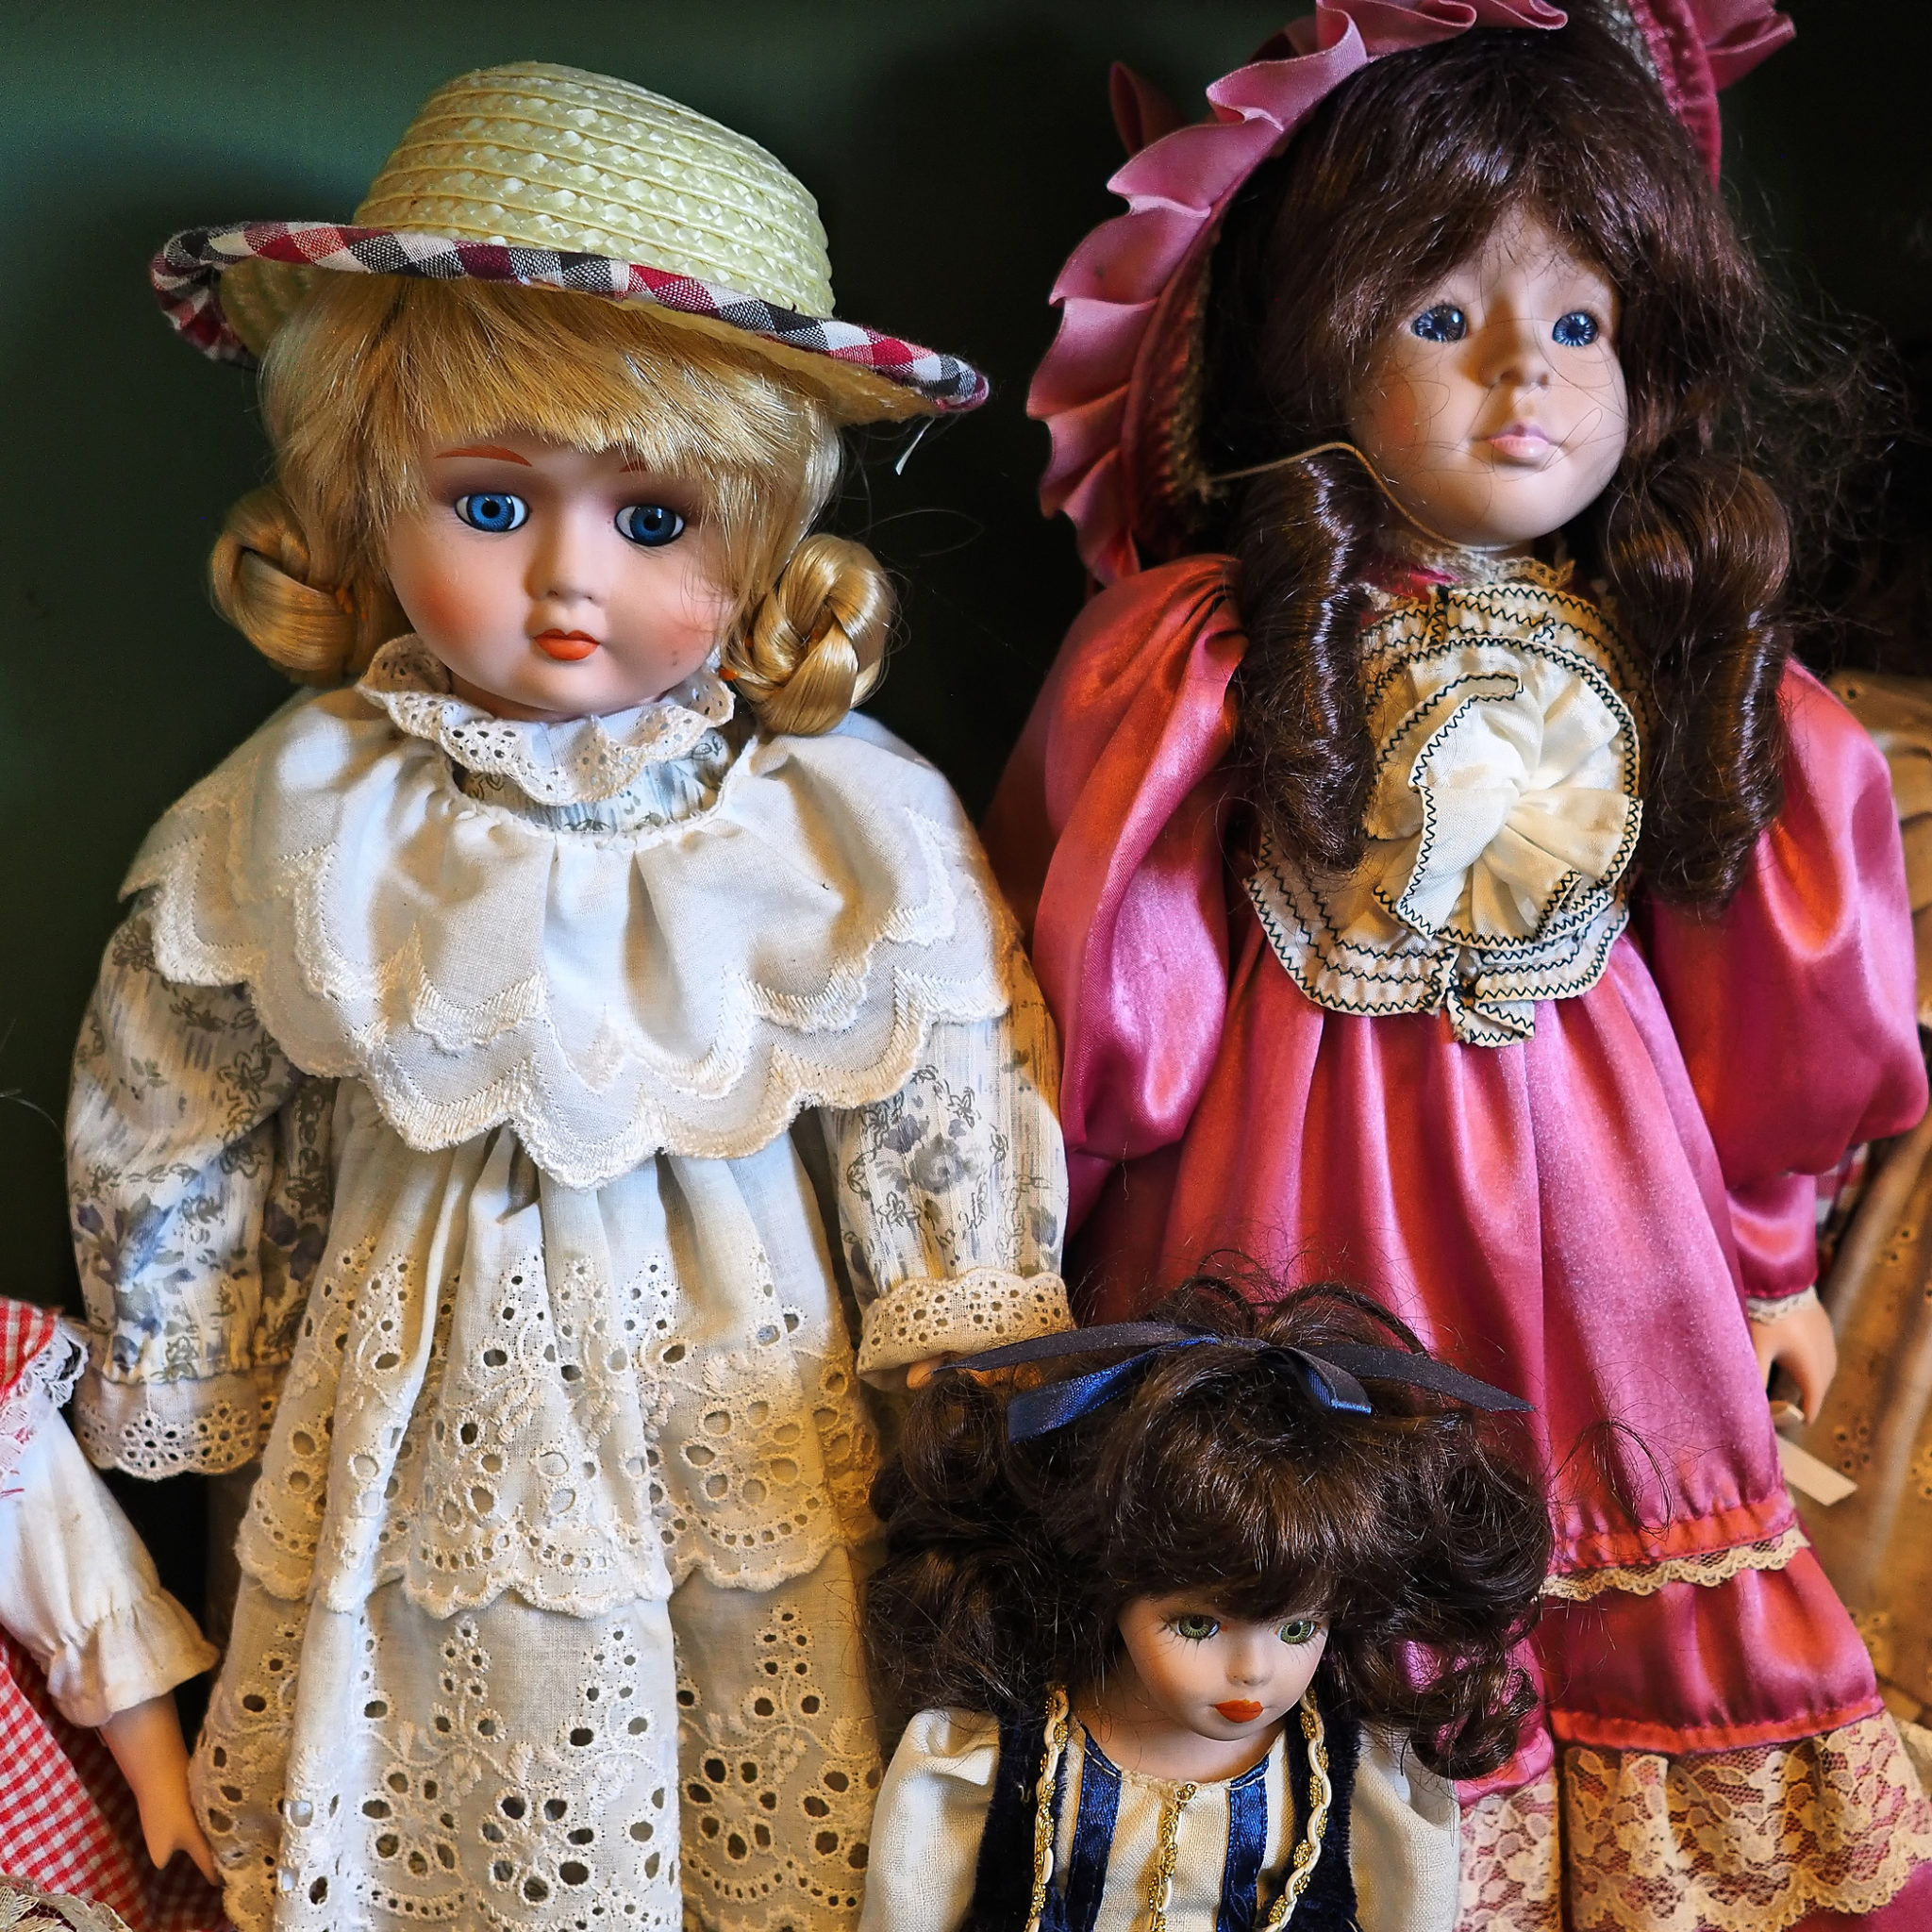 The Science Behind Making Valuable Porcelain Dolls